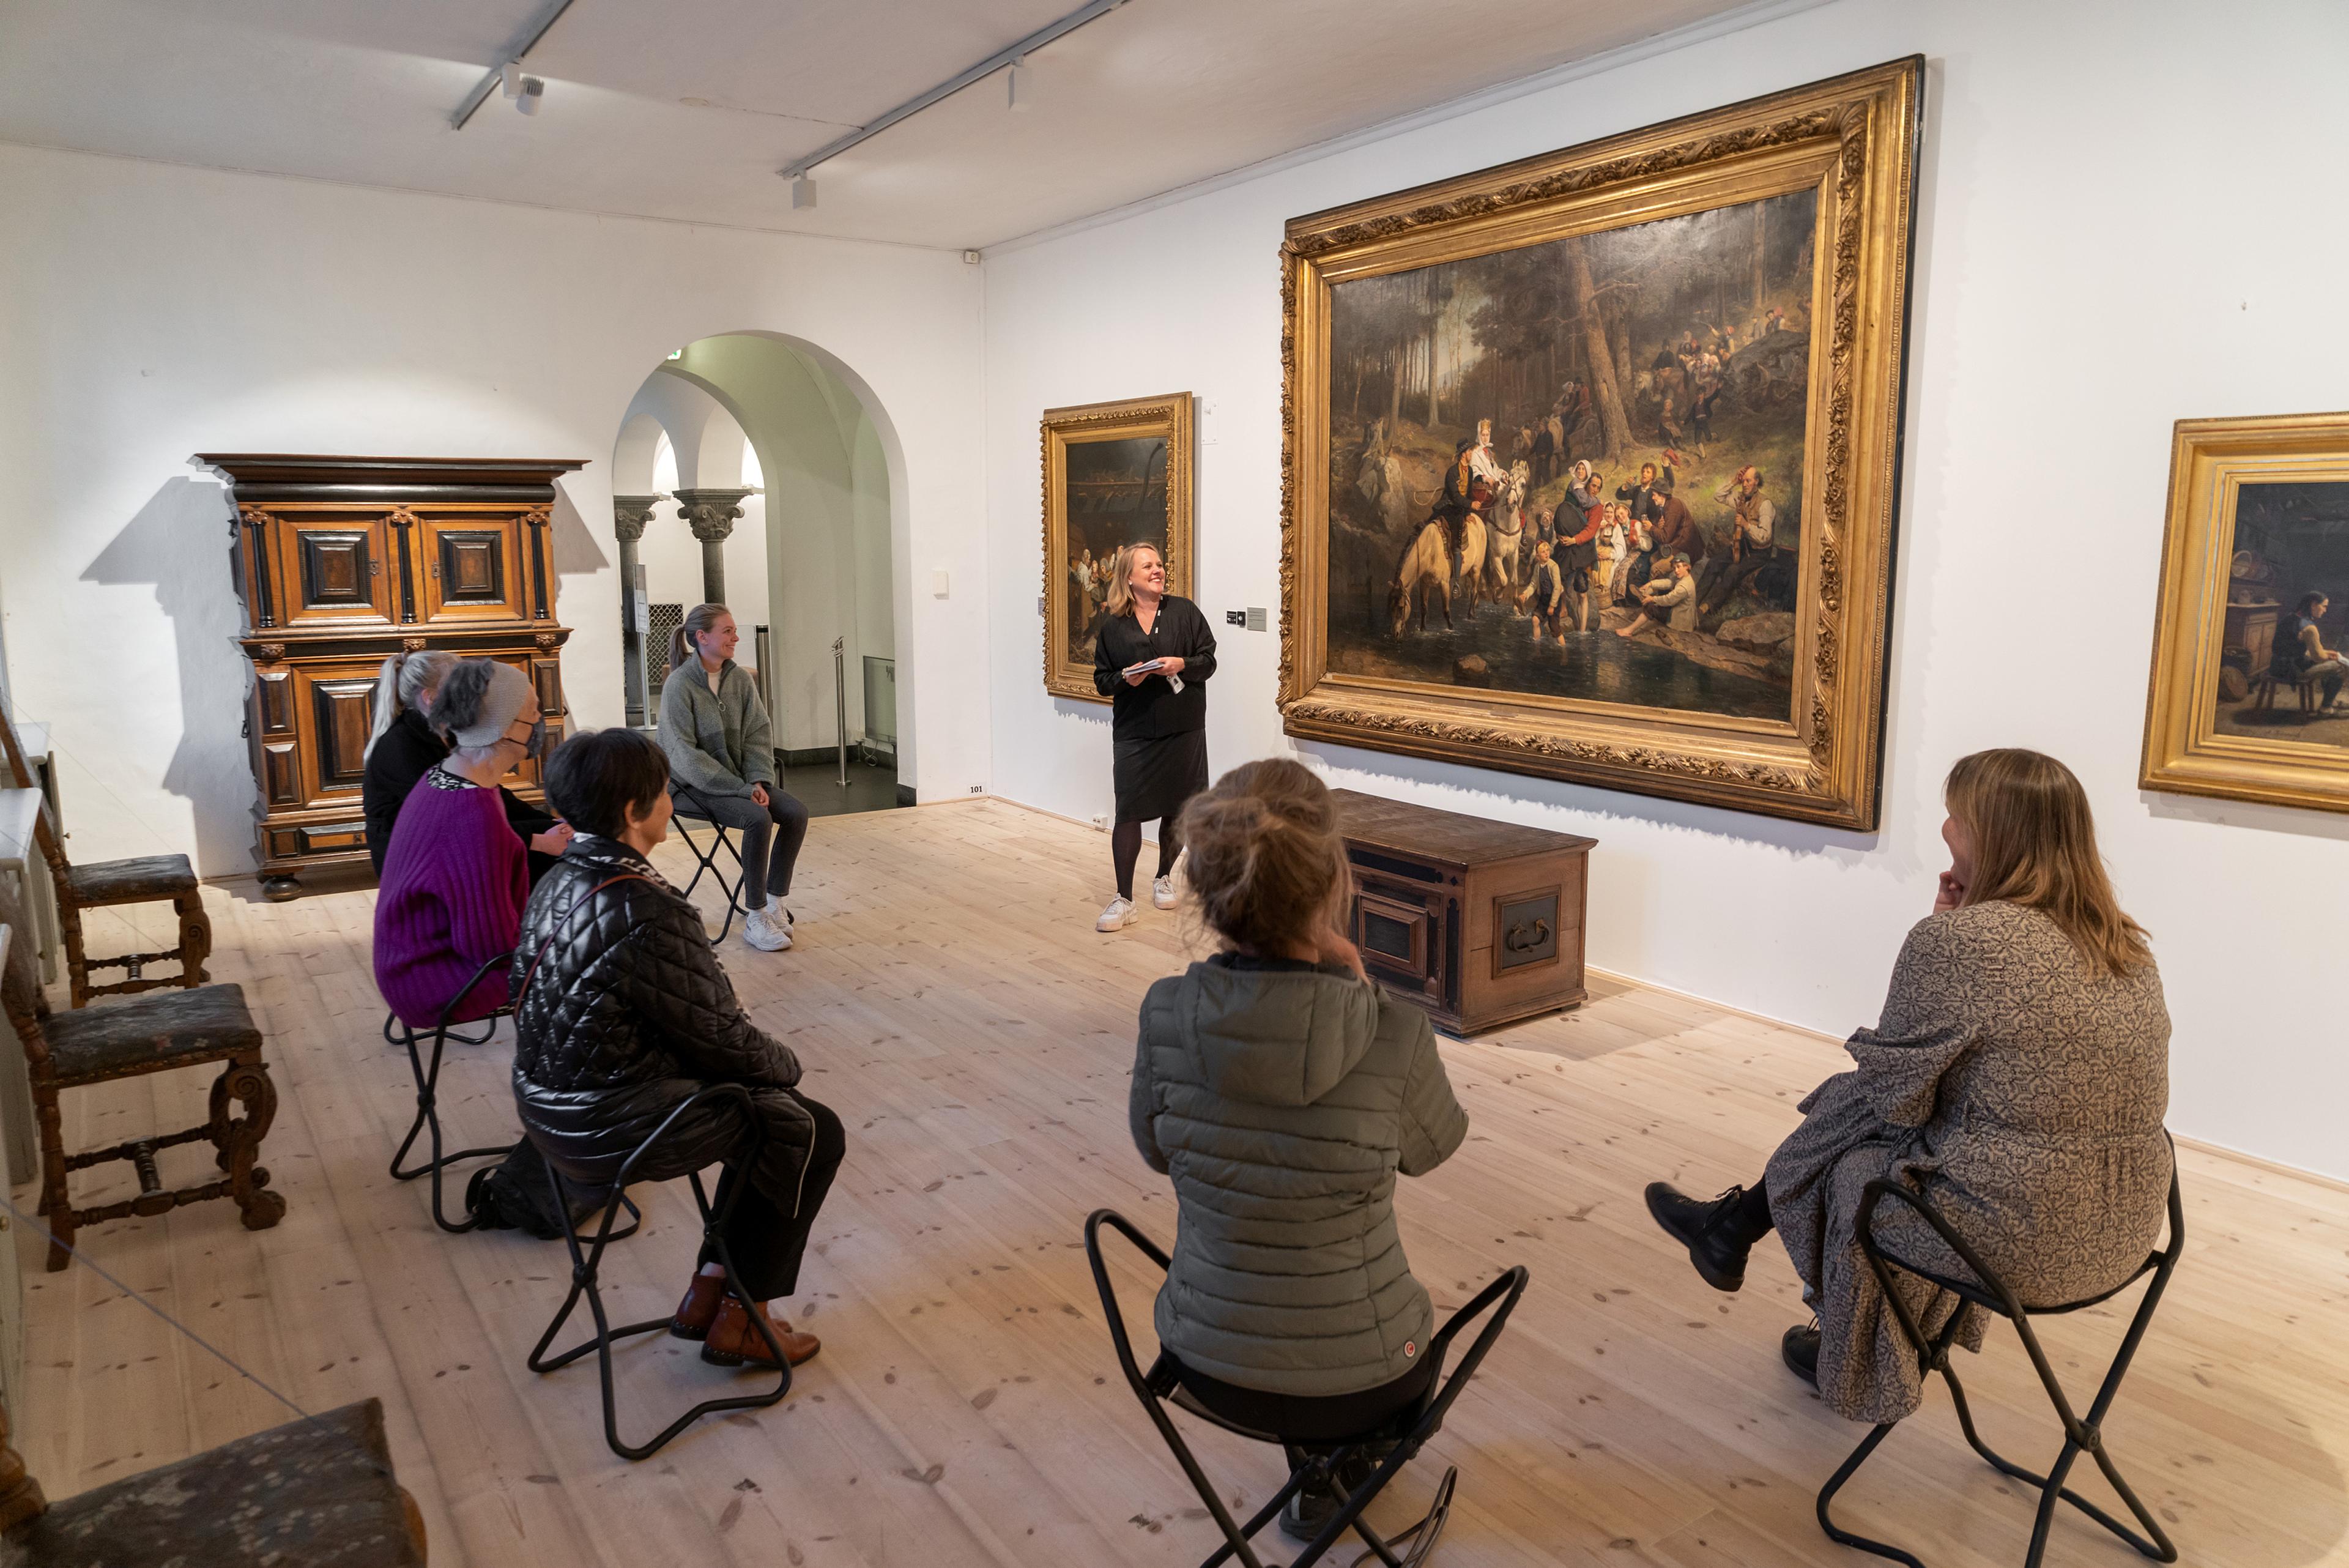 A museum educator is standing in front of a painting, talking to a group of people.